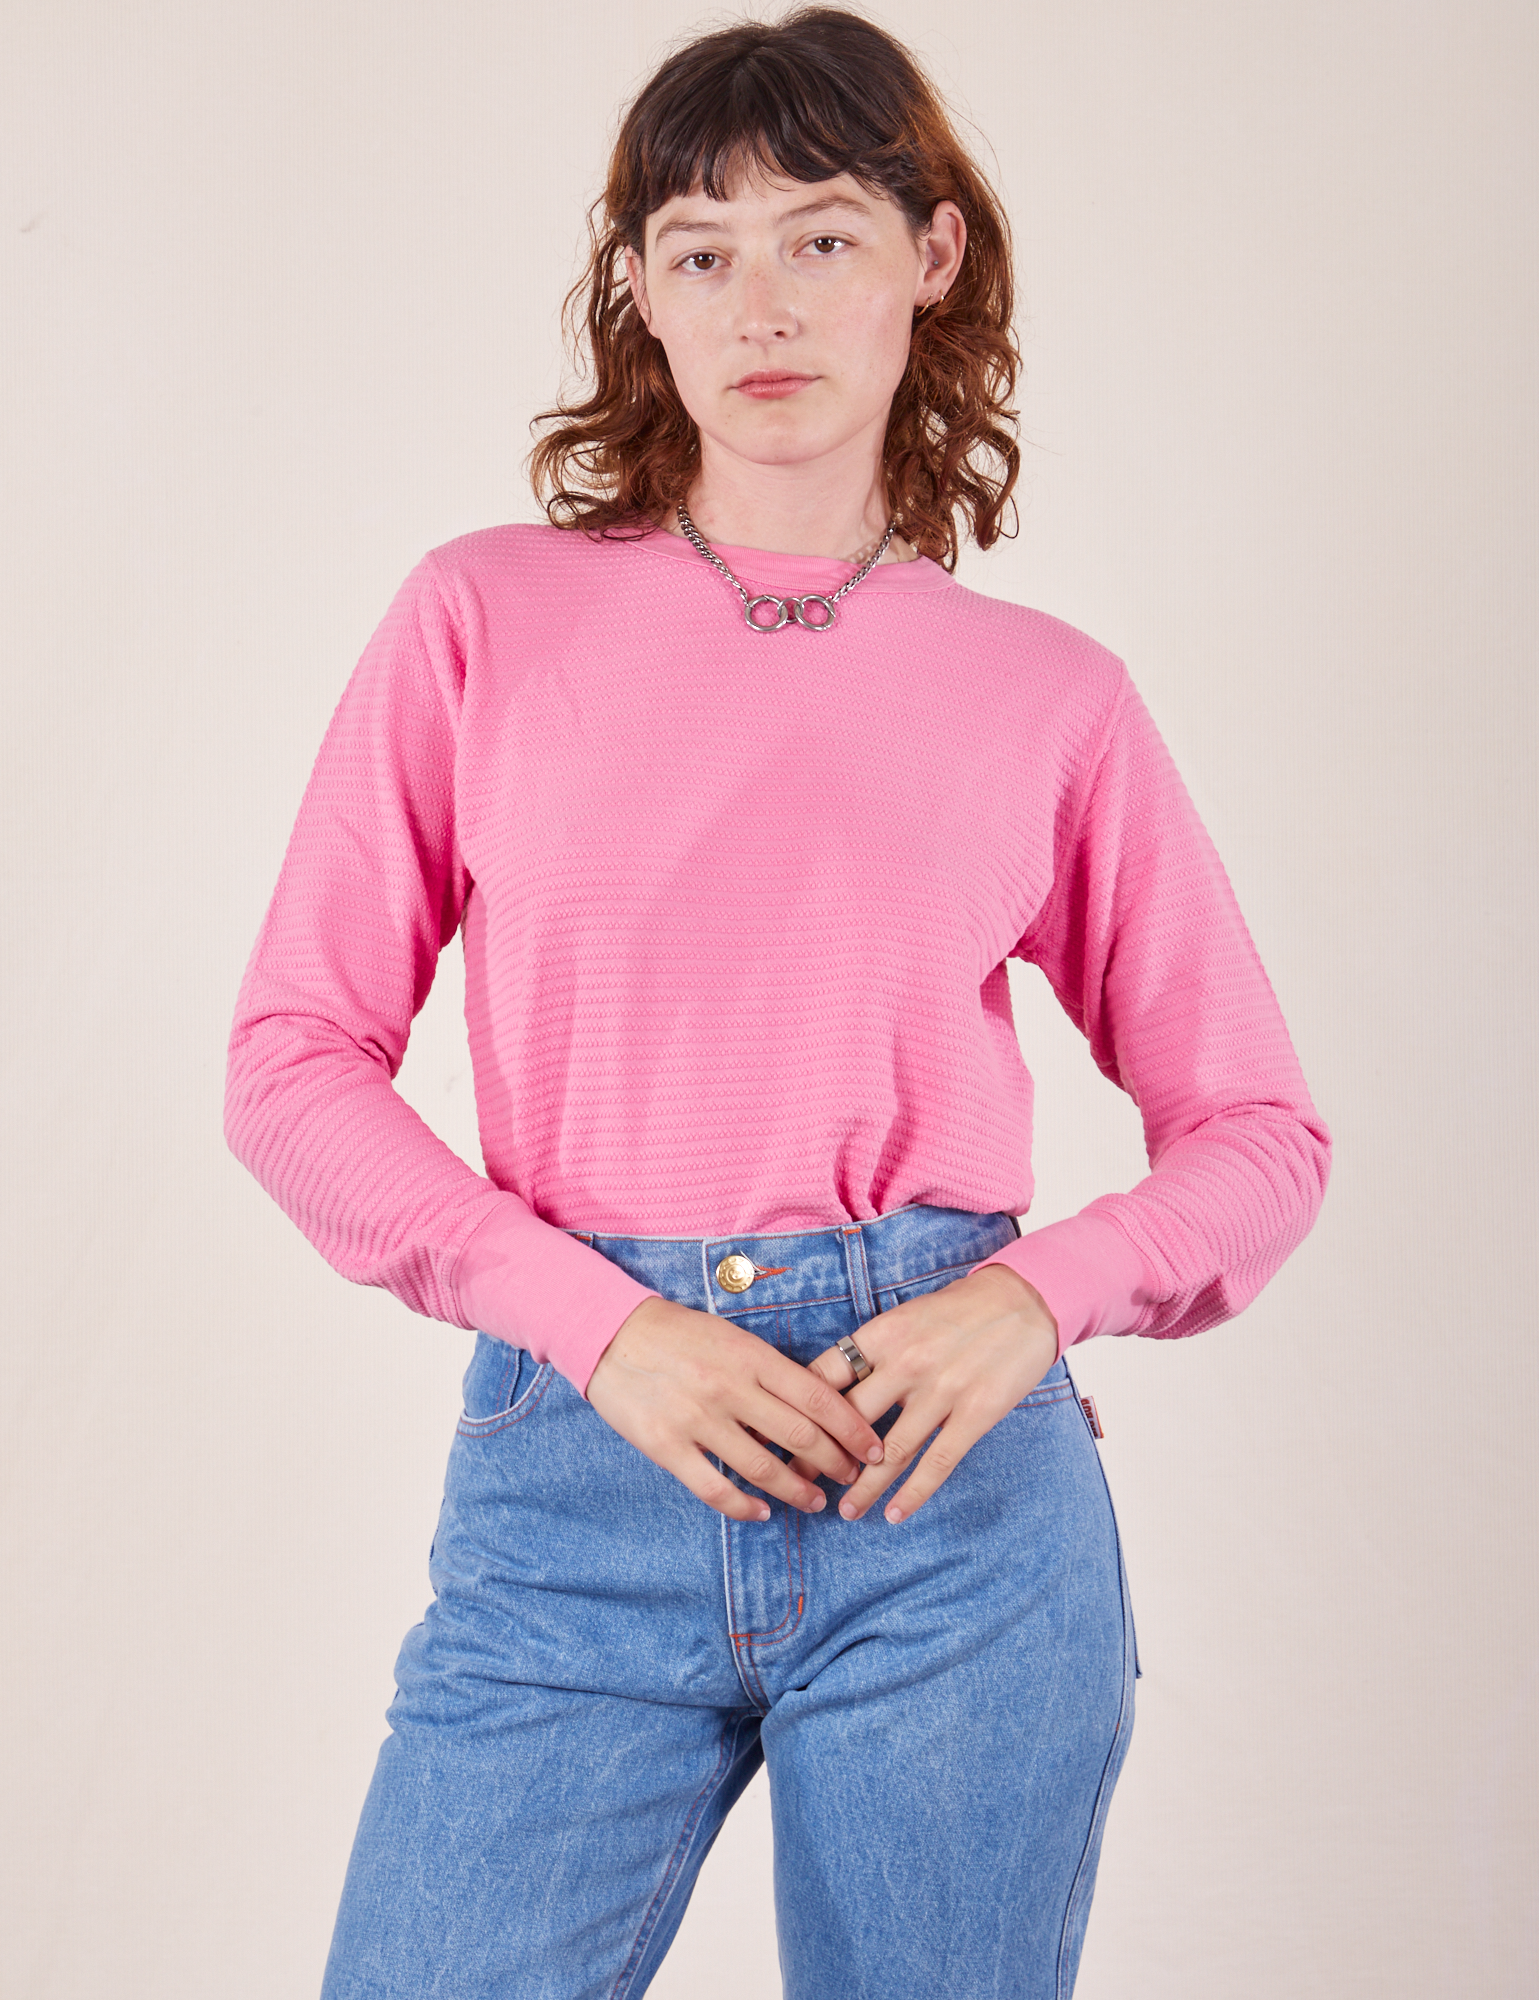 Alex is wearing Honeycomb Thermal in Bubblegum Pink